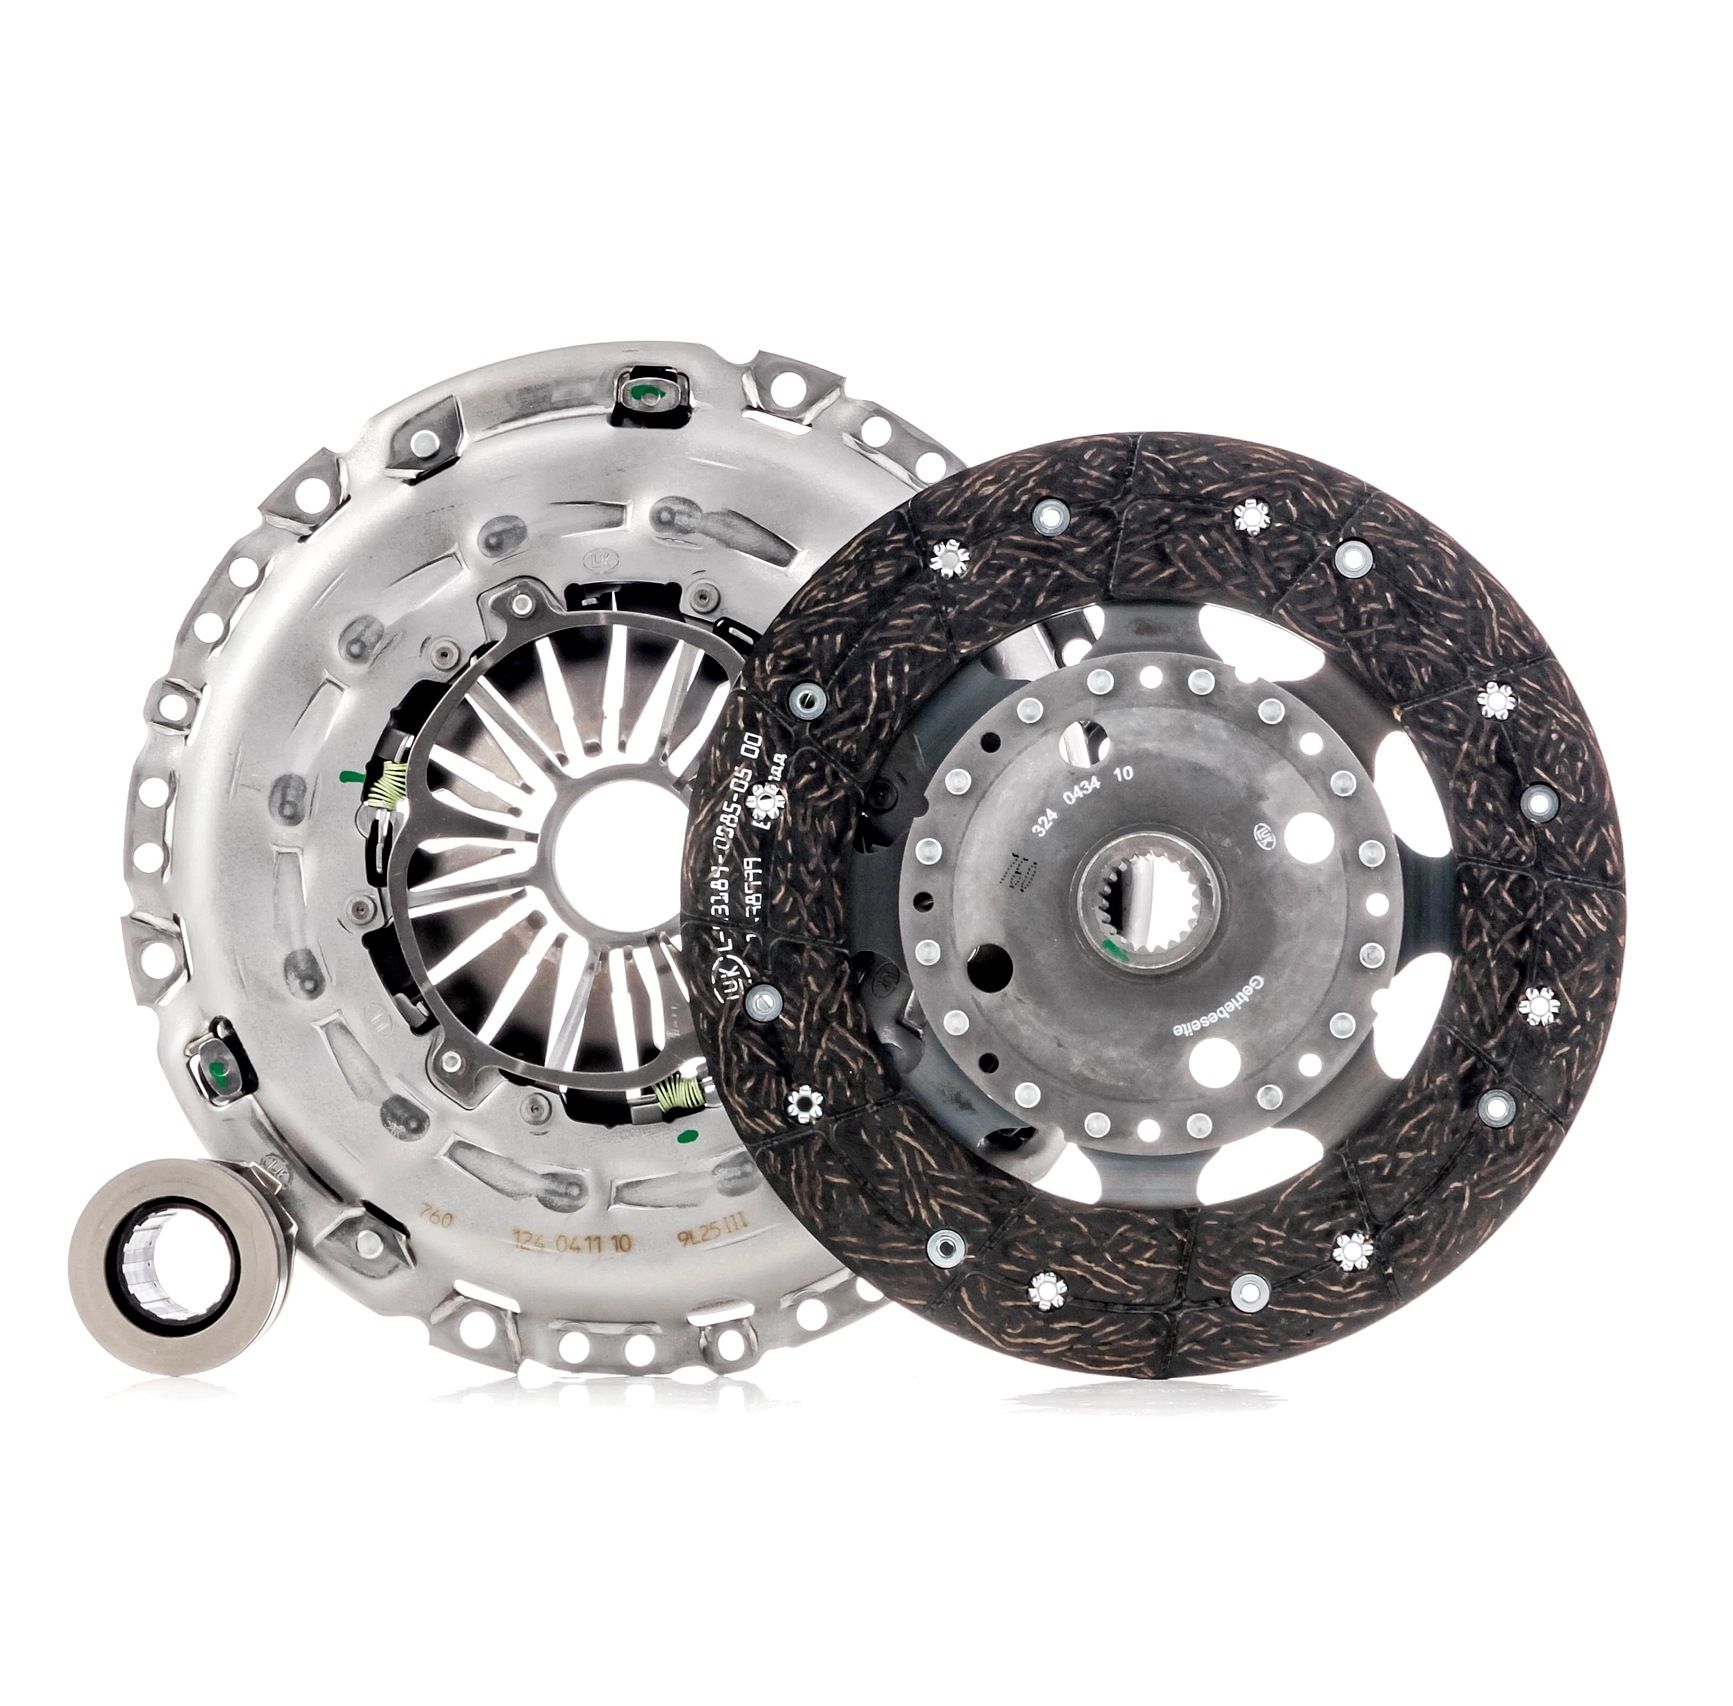 LuK 624 3267 00 Clutch kit for engines with dual-mass flywheel, with clutch release bearing, Requires special tools for mounting, Check and replace dual-mass flywheel if necessary., with automatic adjustment, 240mm